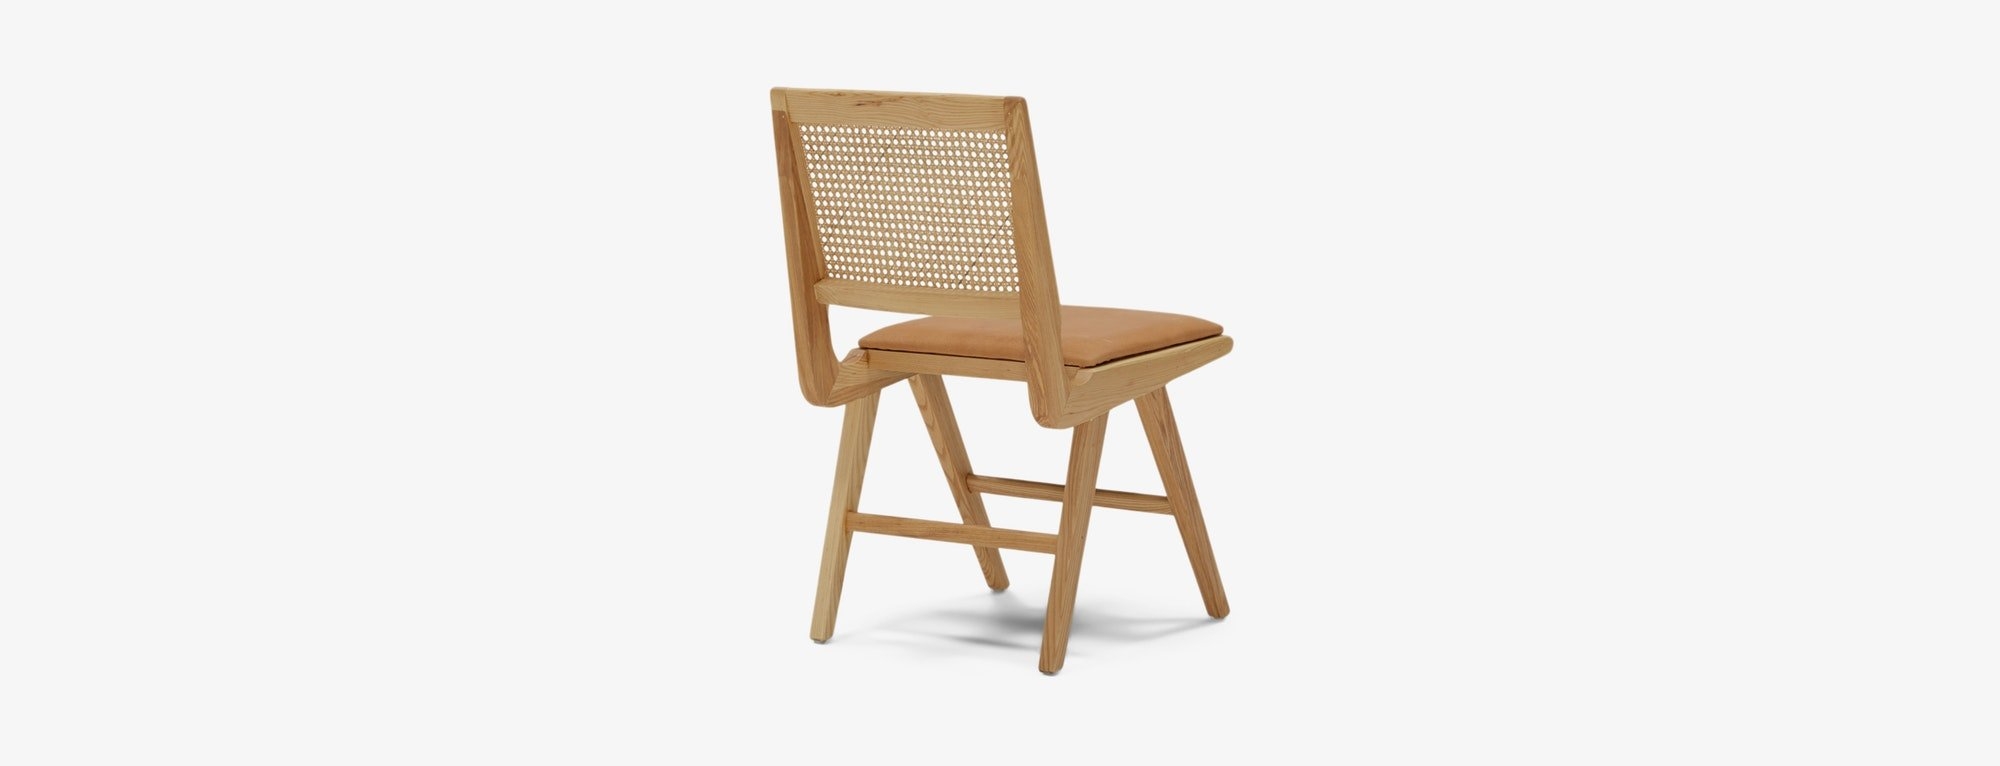 Soph Dining Chair - Image 2